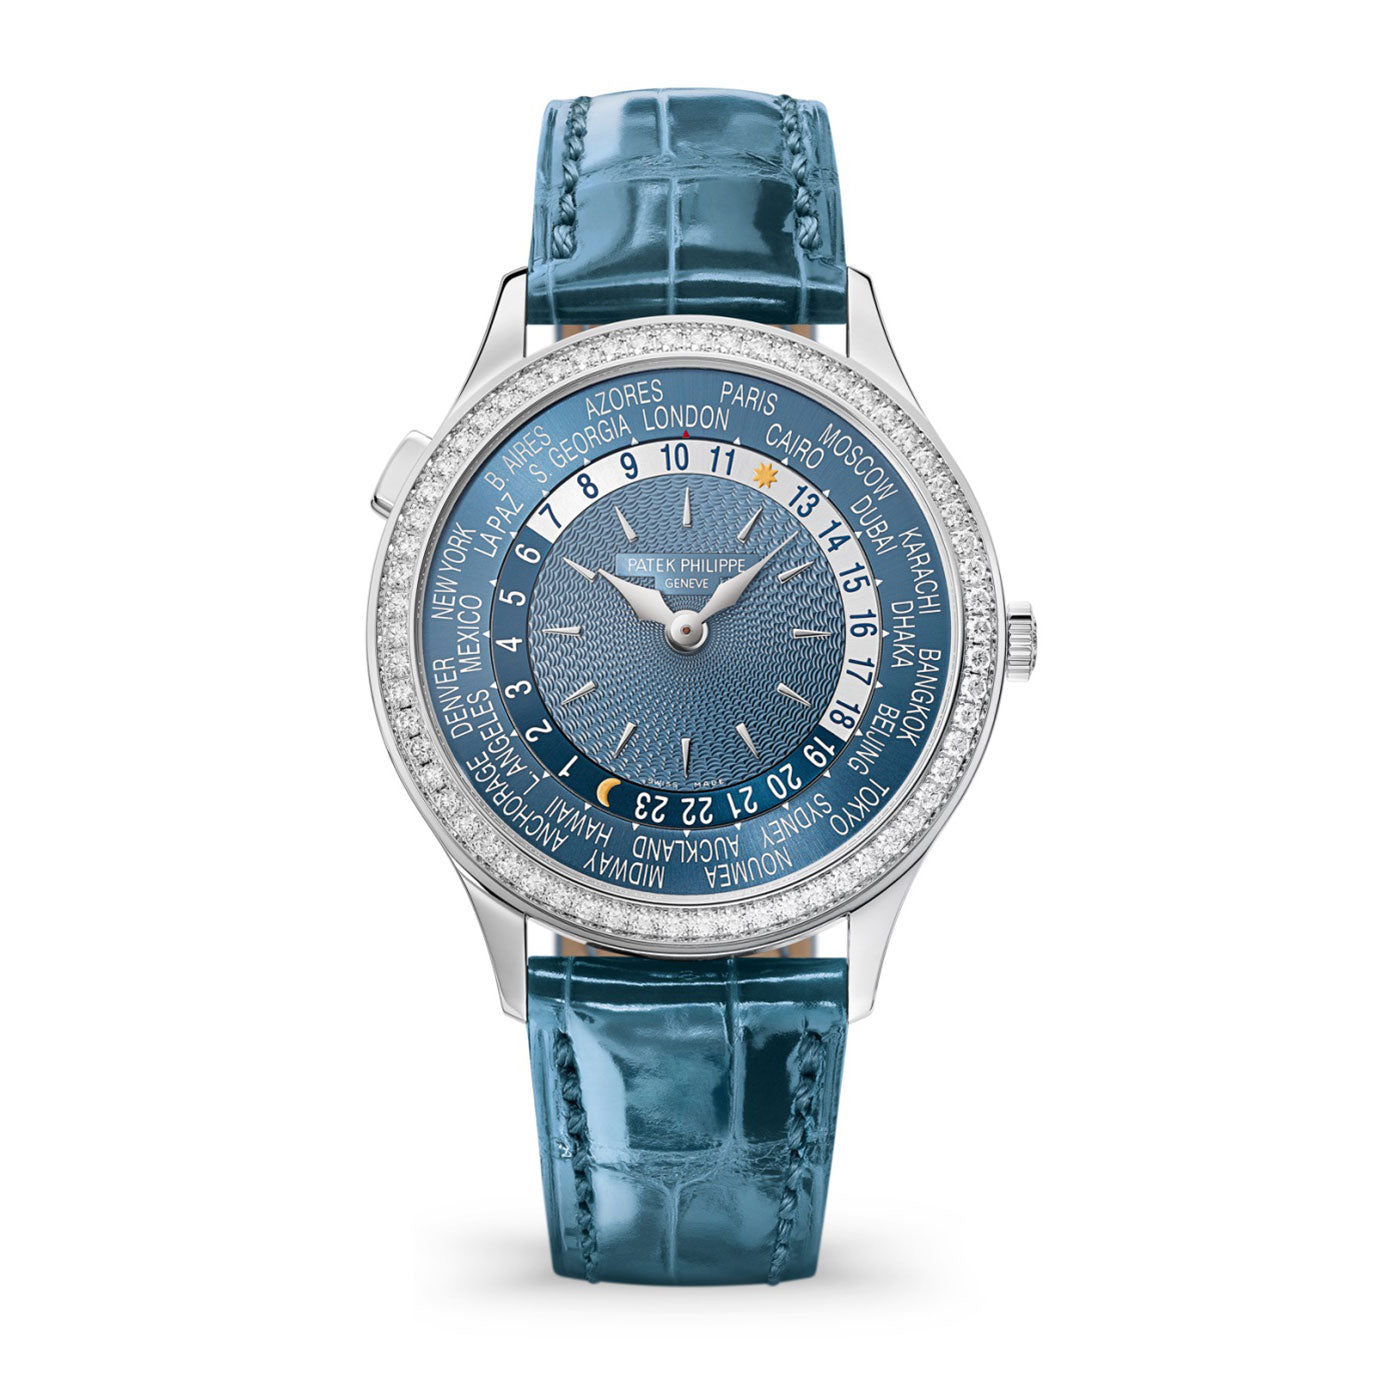 Patek Philippe Women’s Complication World-Time, 18k White Gold set with 89 diamonds (~1.03 ct.), 36mm, Ref# 7130G-016